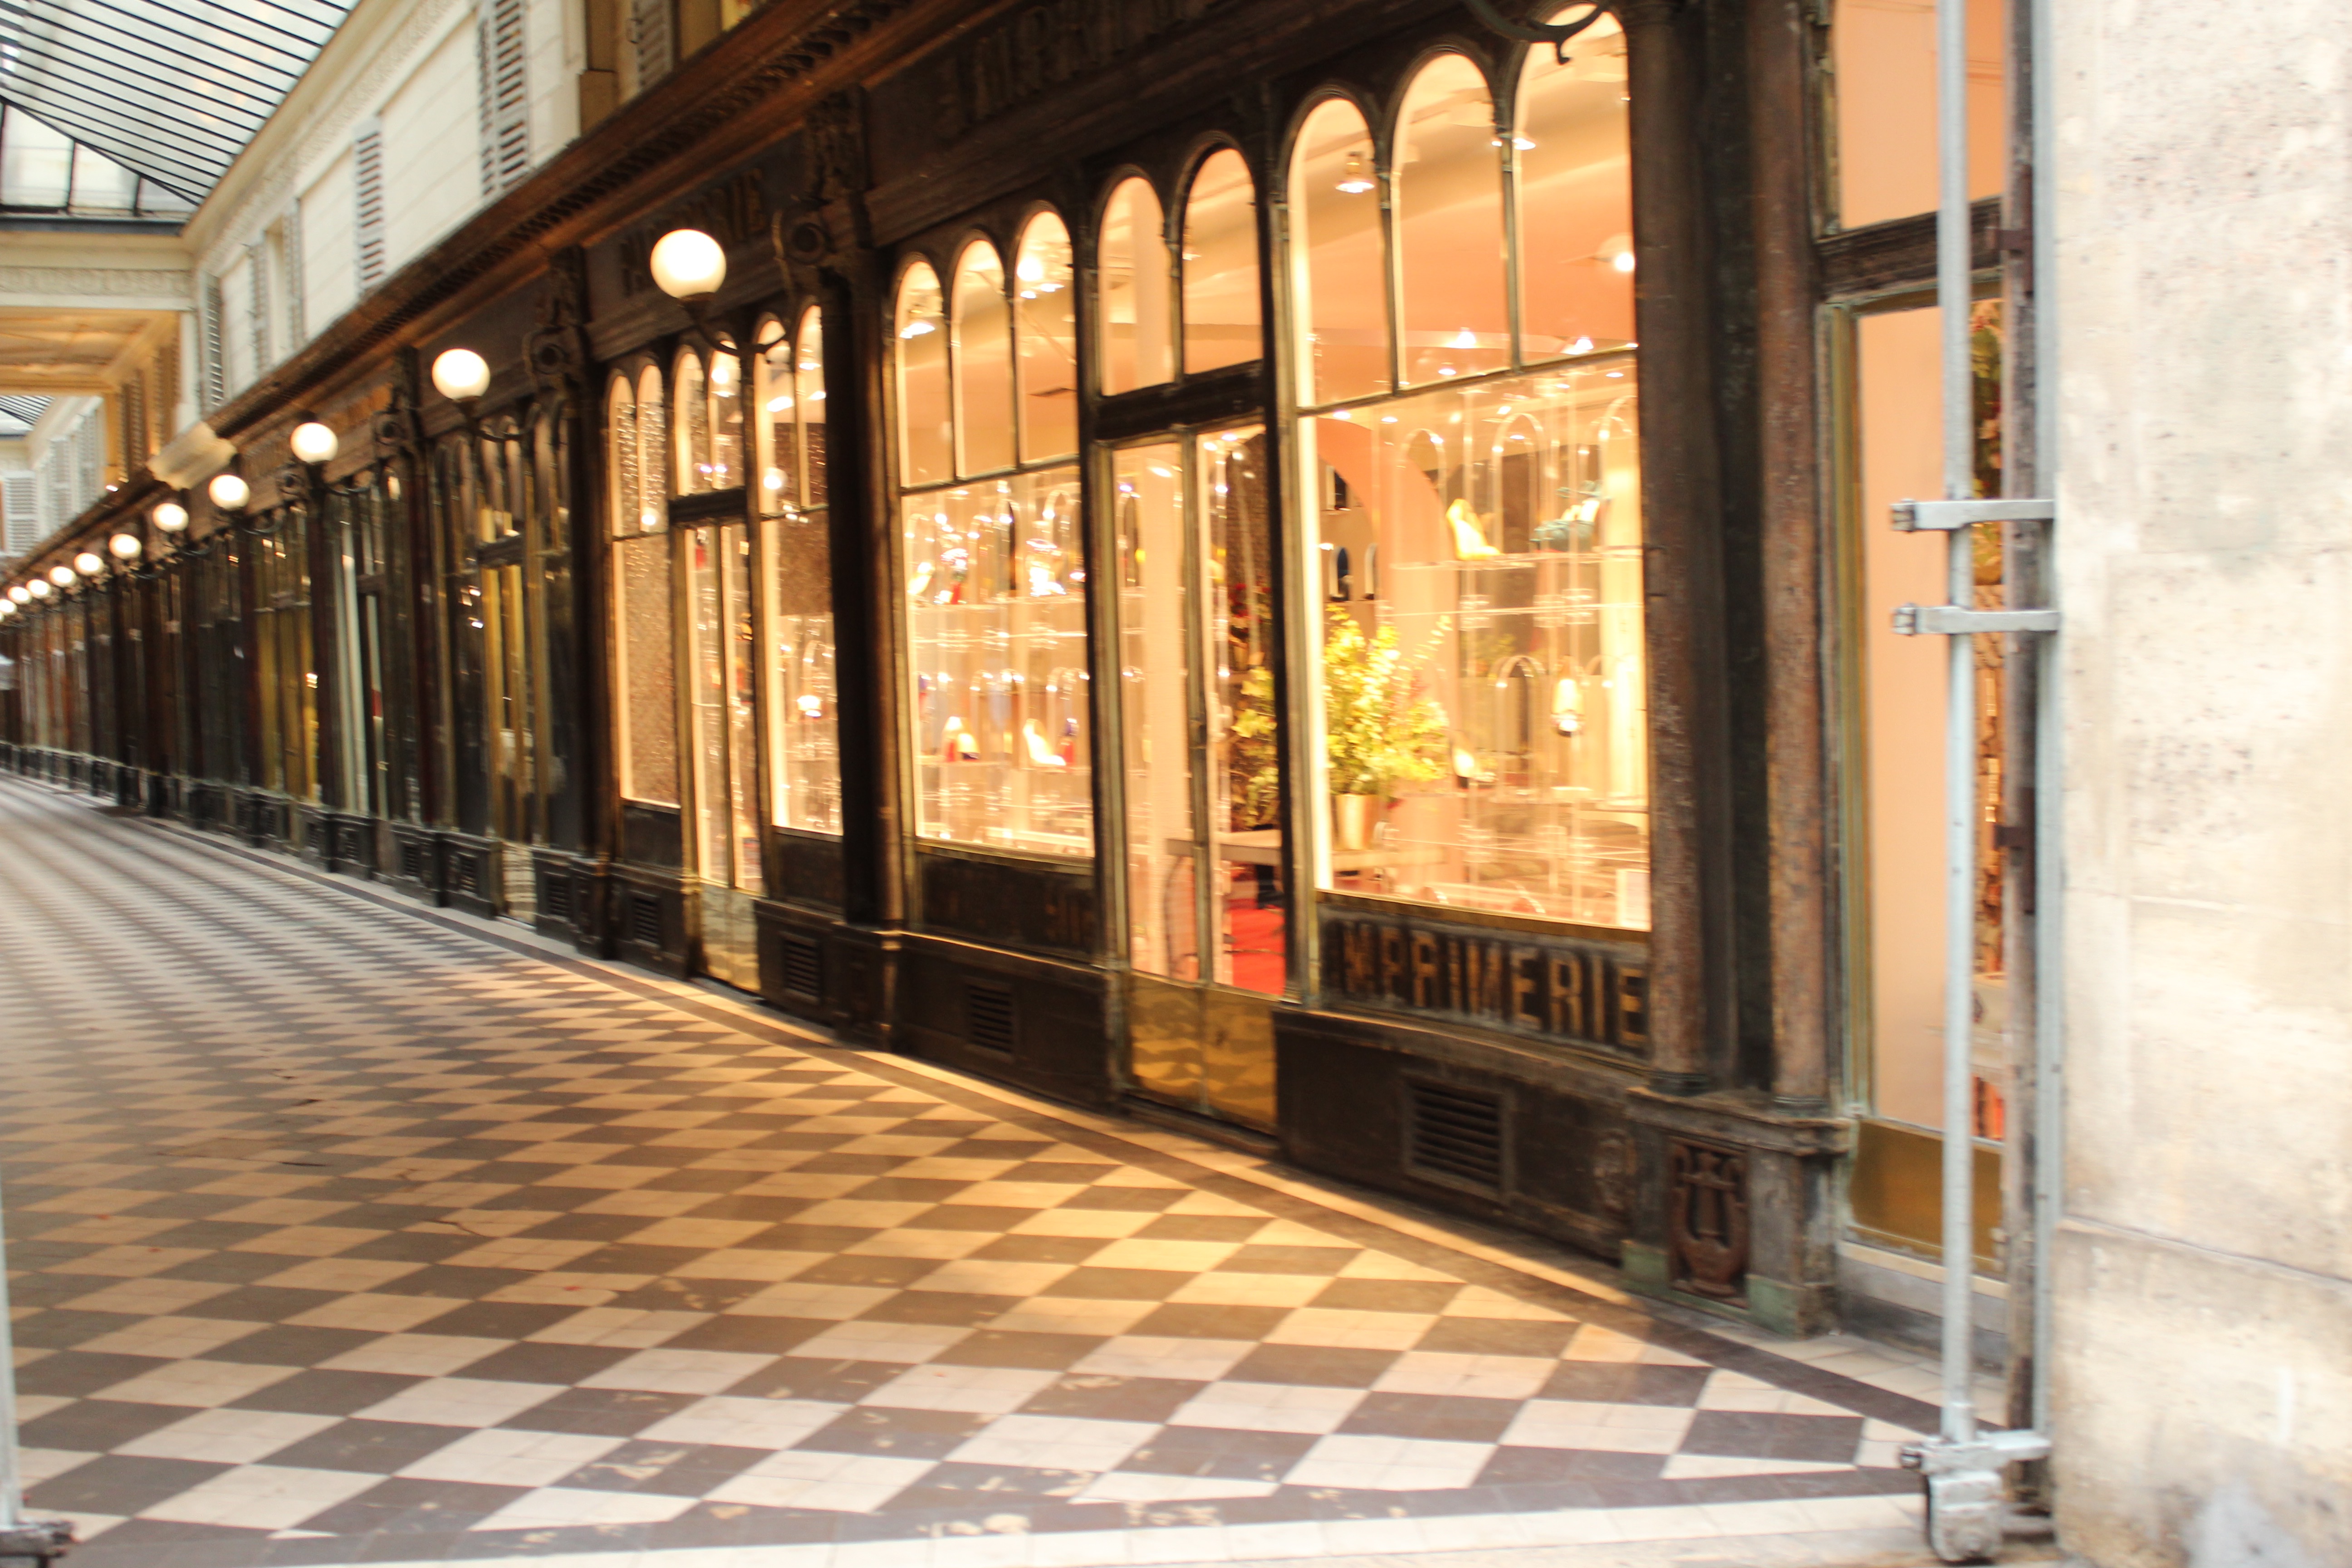 My Paris Trip, "'S Marvelous." Galerie Véro-Dodat, Louboutin flagship store is located in this historic shopping gallery.